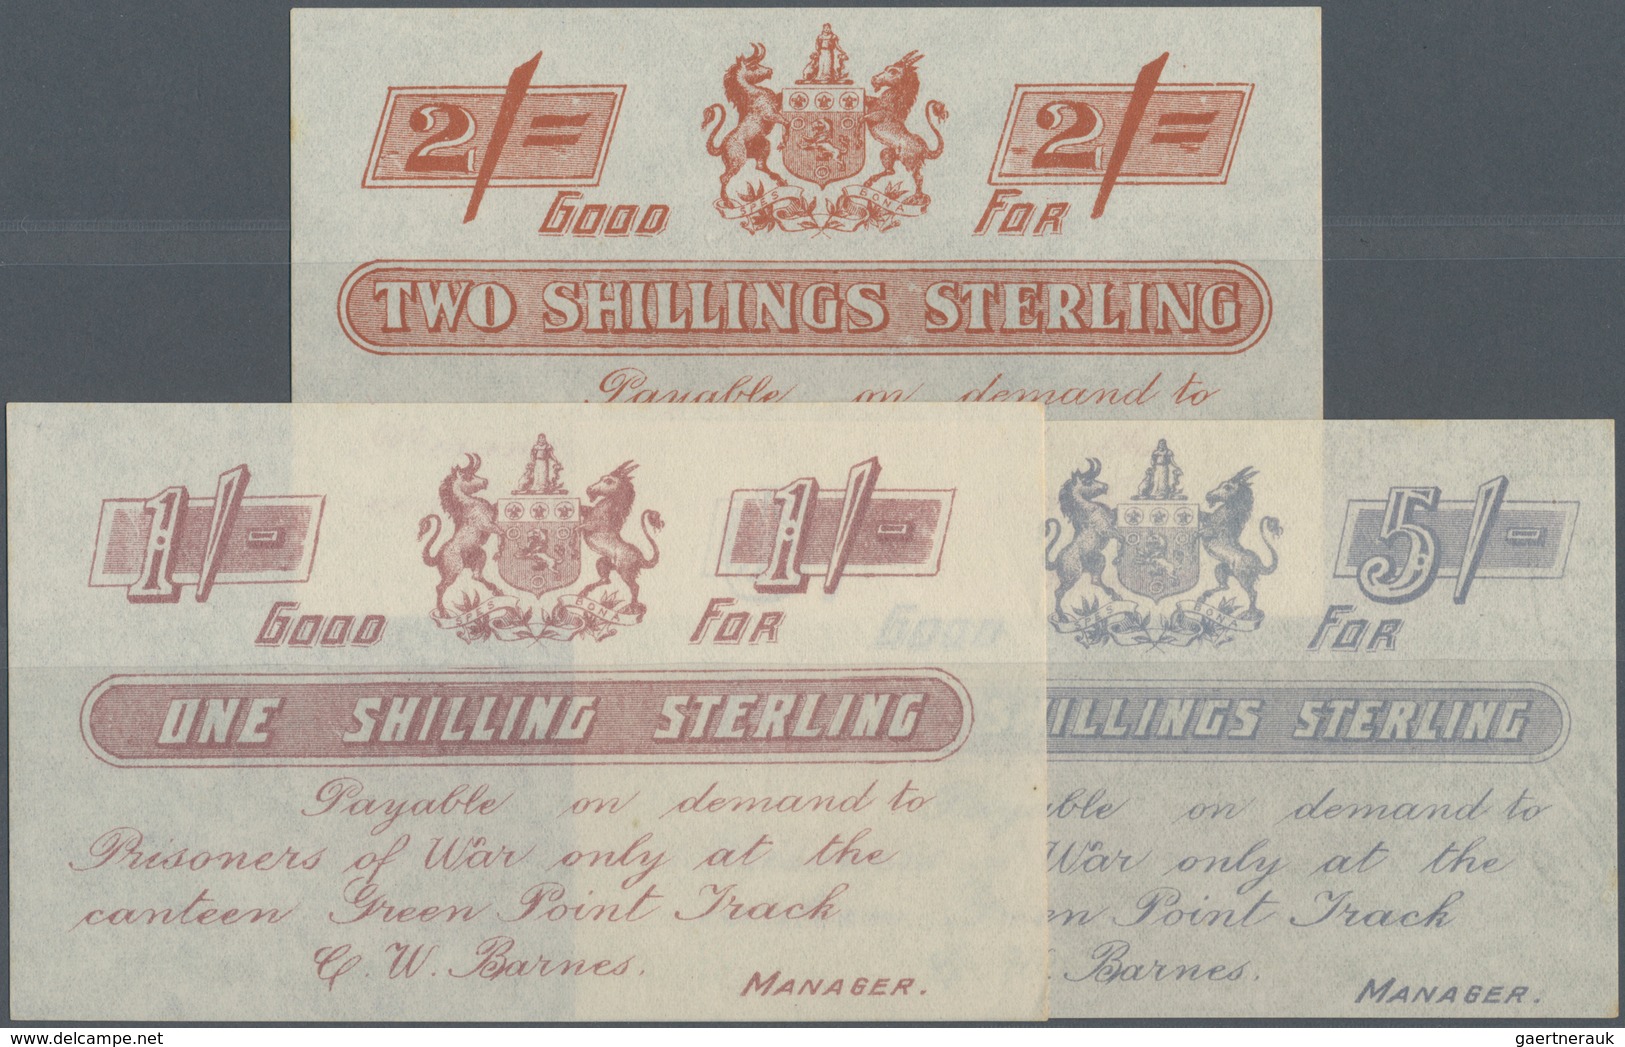 South Africa / Südafrika: Set Of 3 Notes BOER WAR Containing 1, 2 And 5 Shillings ND P. NL, All In C - Südafrika